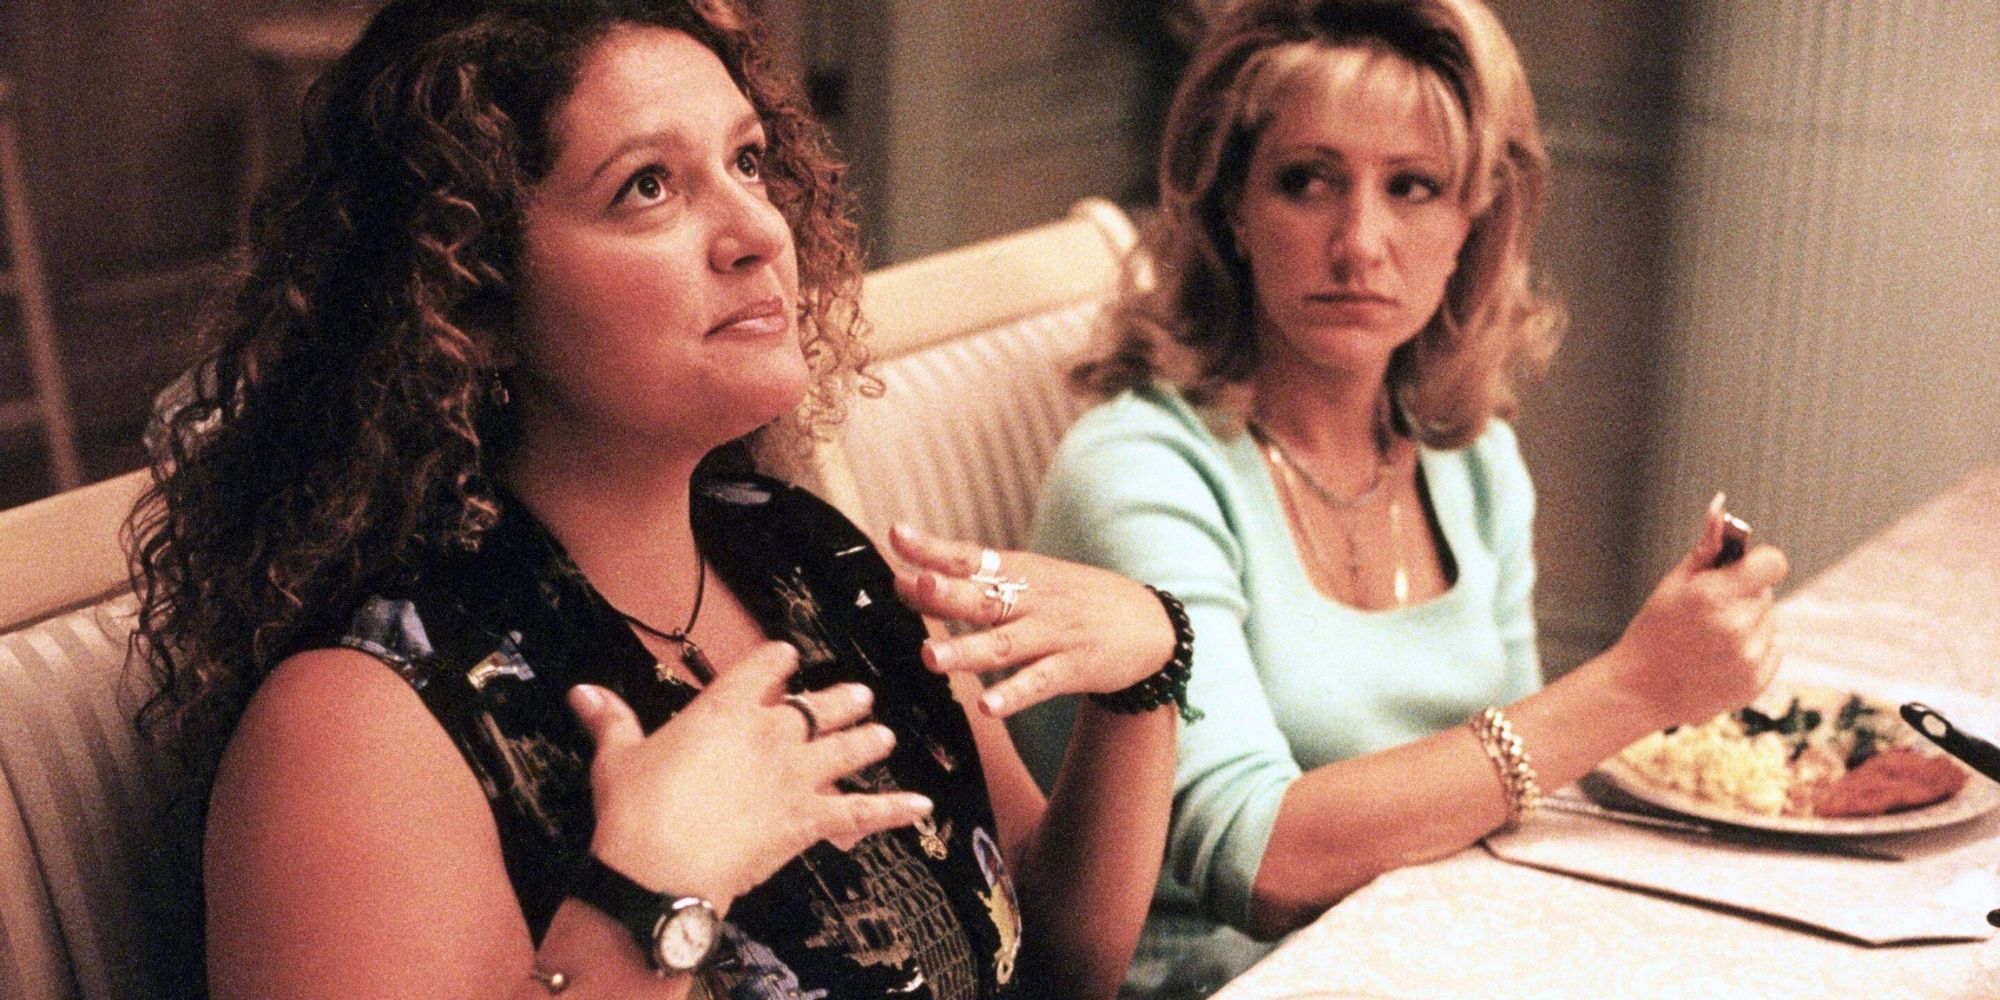 Aida Tuturro sitting next to Edie Falco at the dinner table in The Sopranos